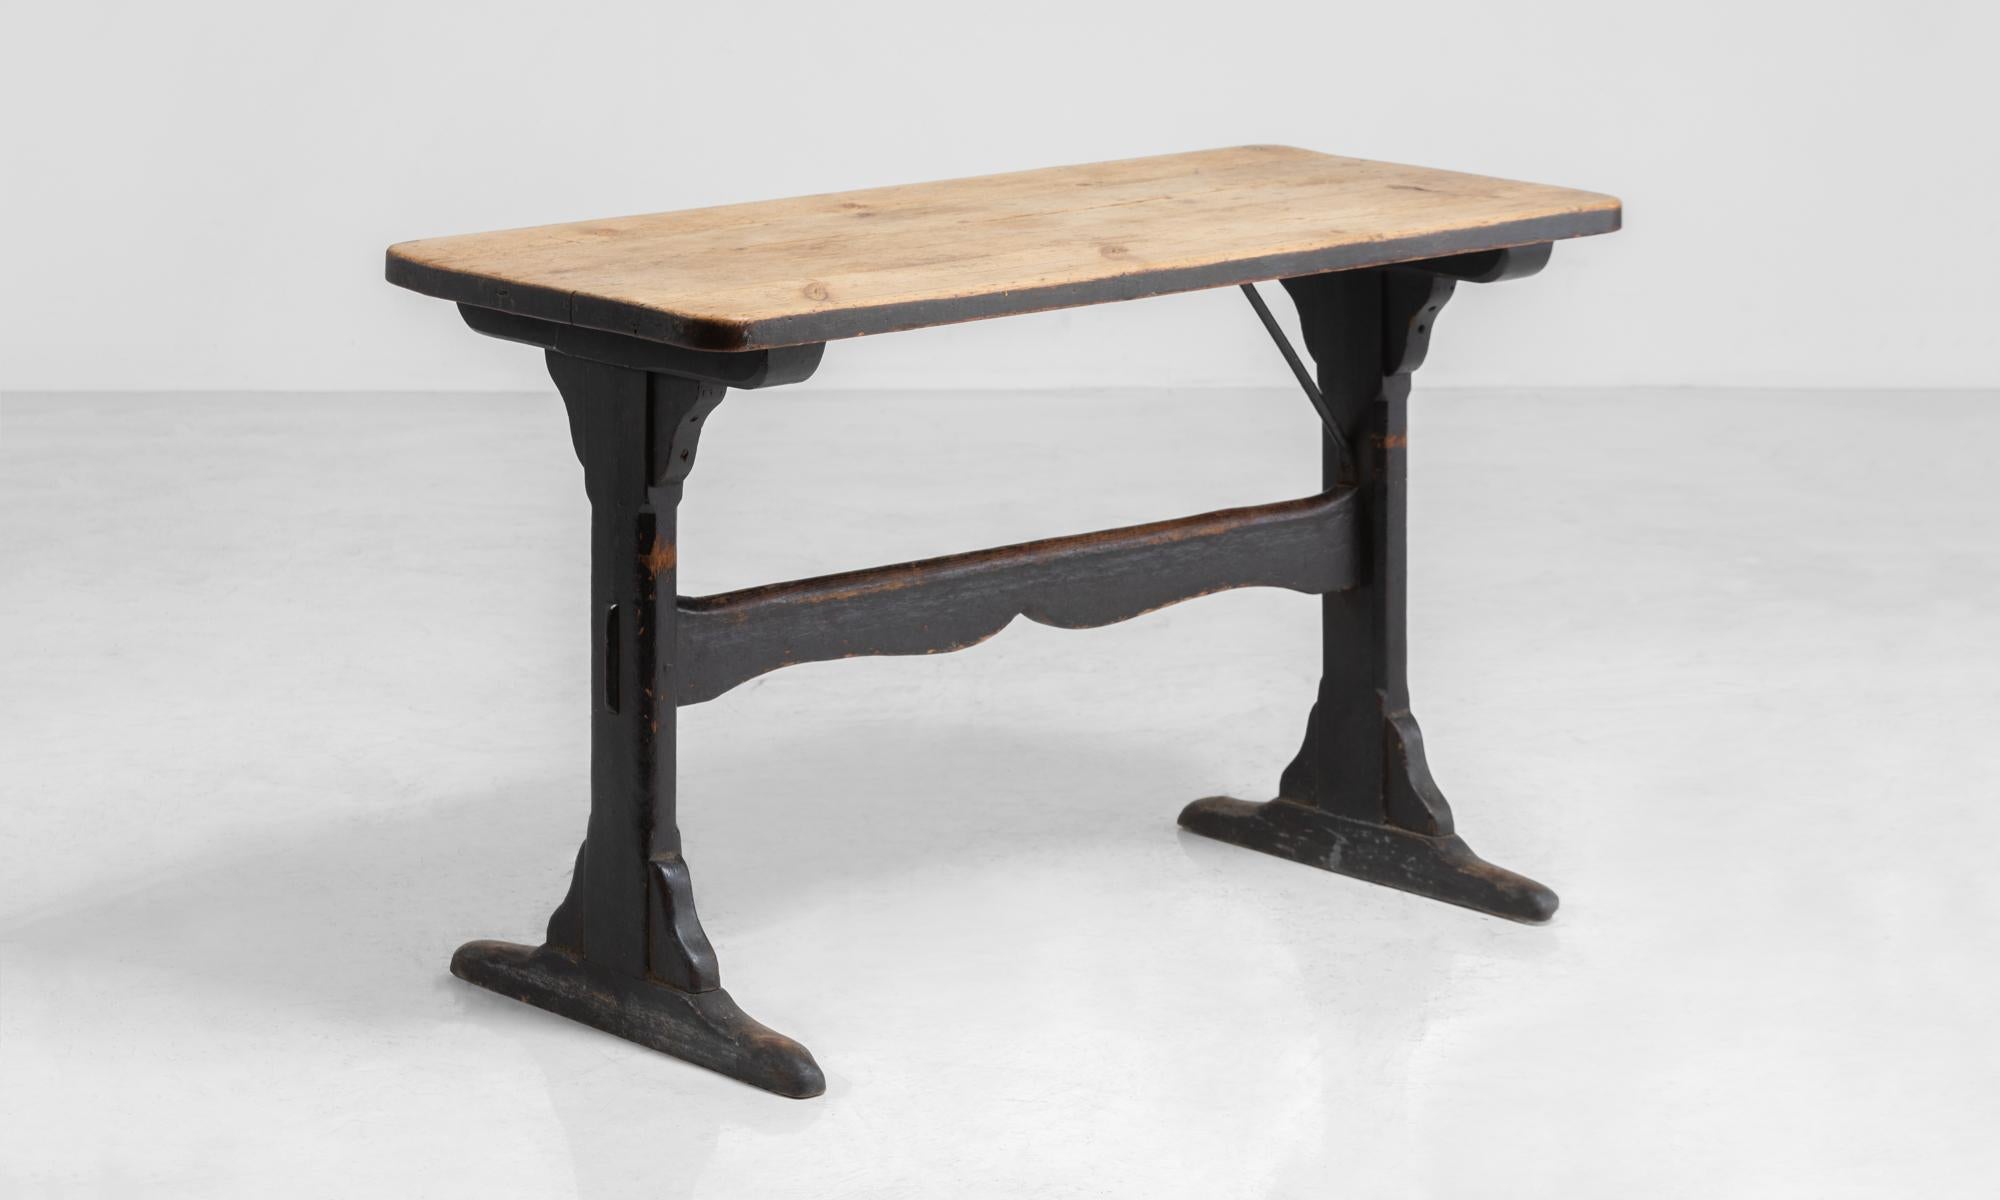 Pine tavern table, England, circa 1850.

Simple, elegant form, includes a scrubbed pine top and ebonized base.

Measures: 47.25